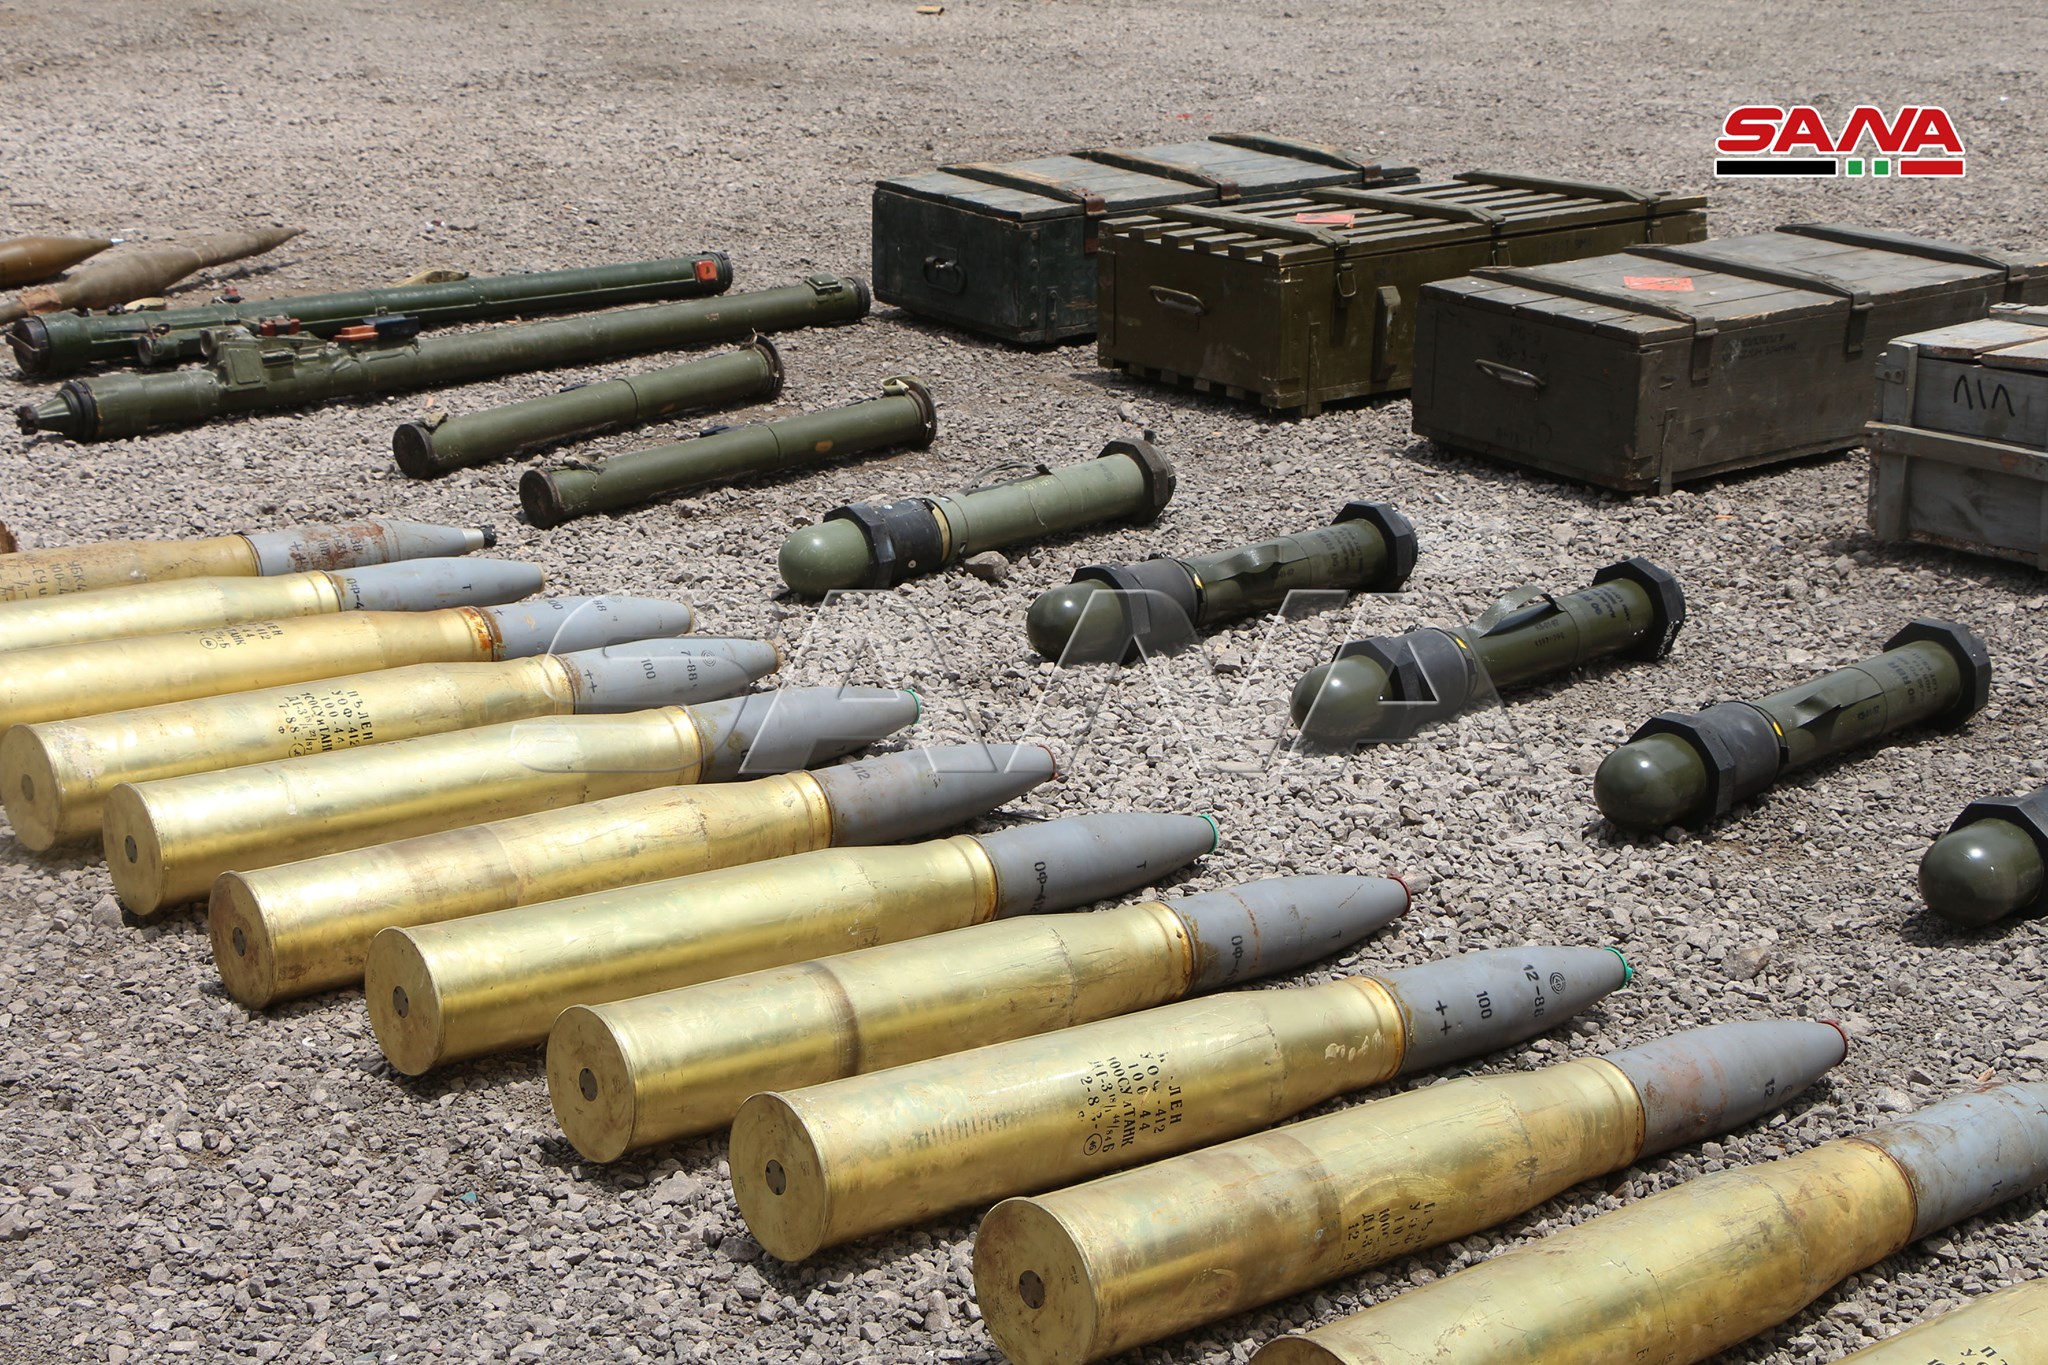 Syrian Army Uncovers Weapons, Including Anti-Aircraft Missiles, In Western Daraa (Photos)